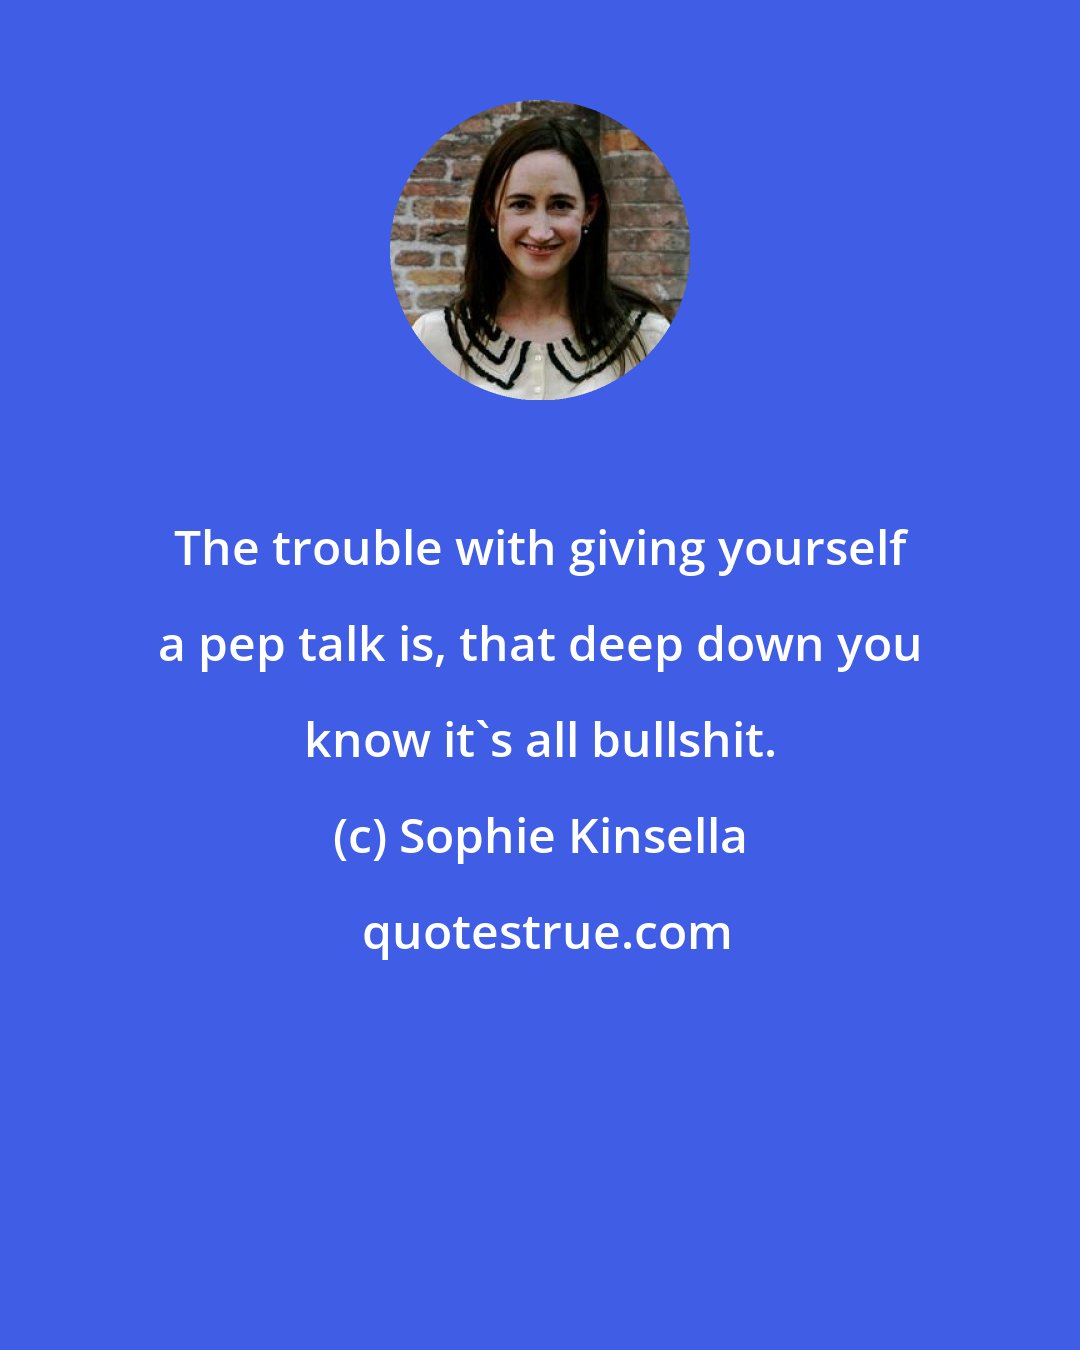 Sophie Kinsella: The trouble with giving yourself a pep talk is, that deep down you know it's all bullshit.